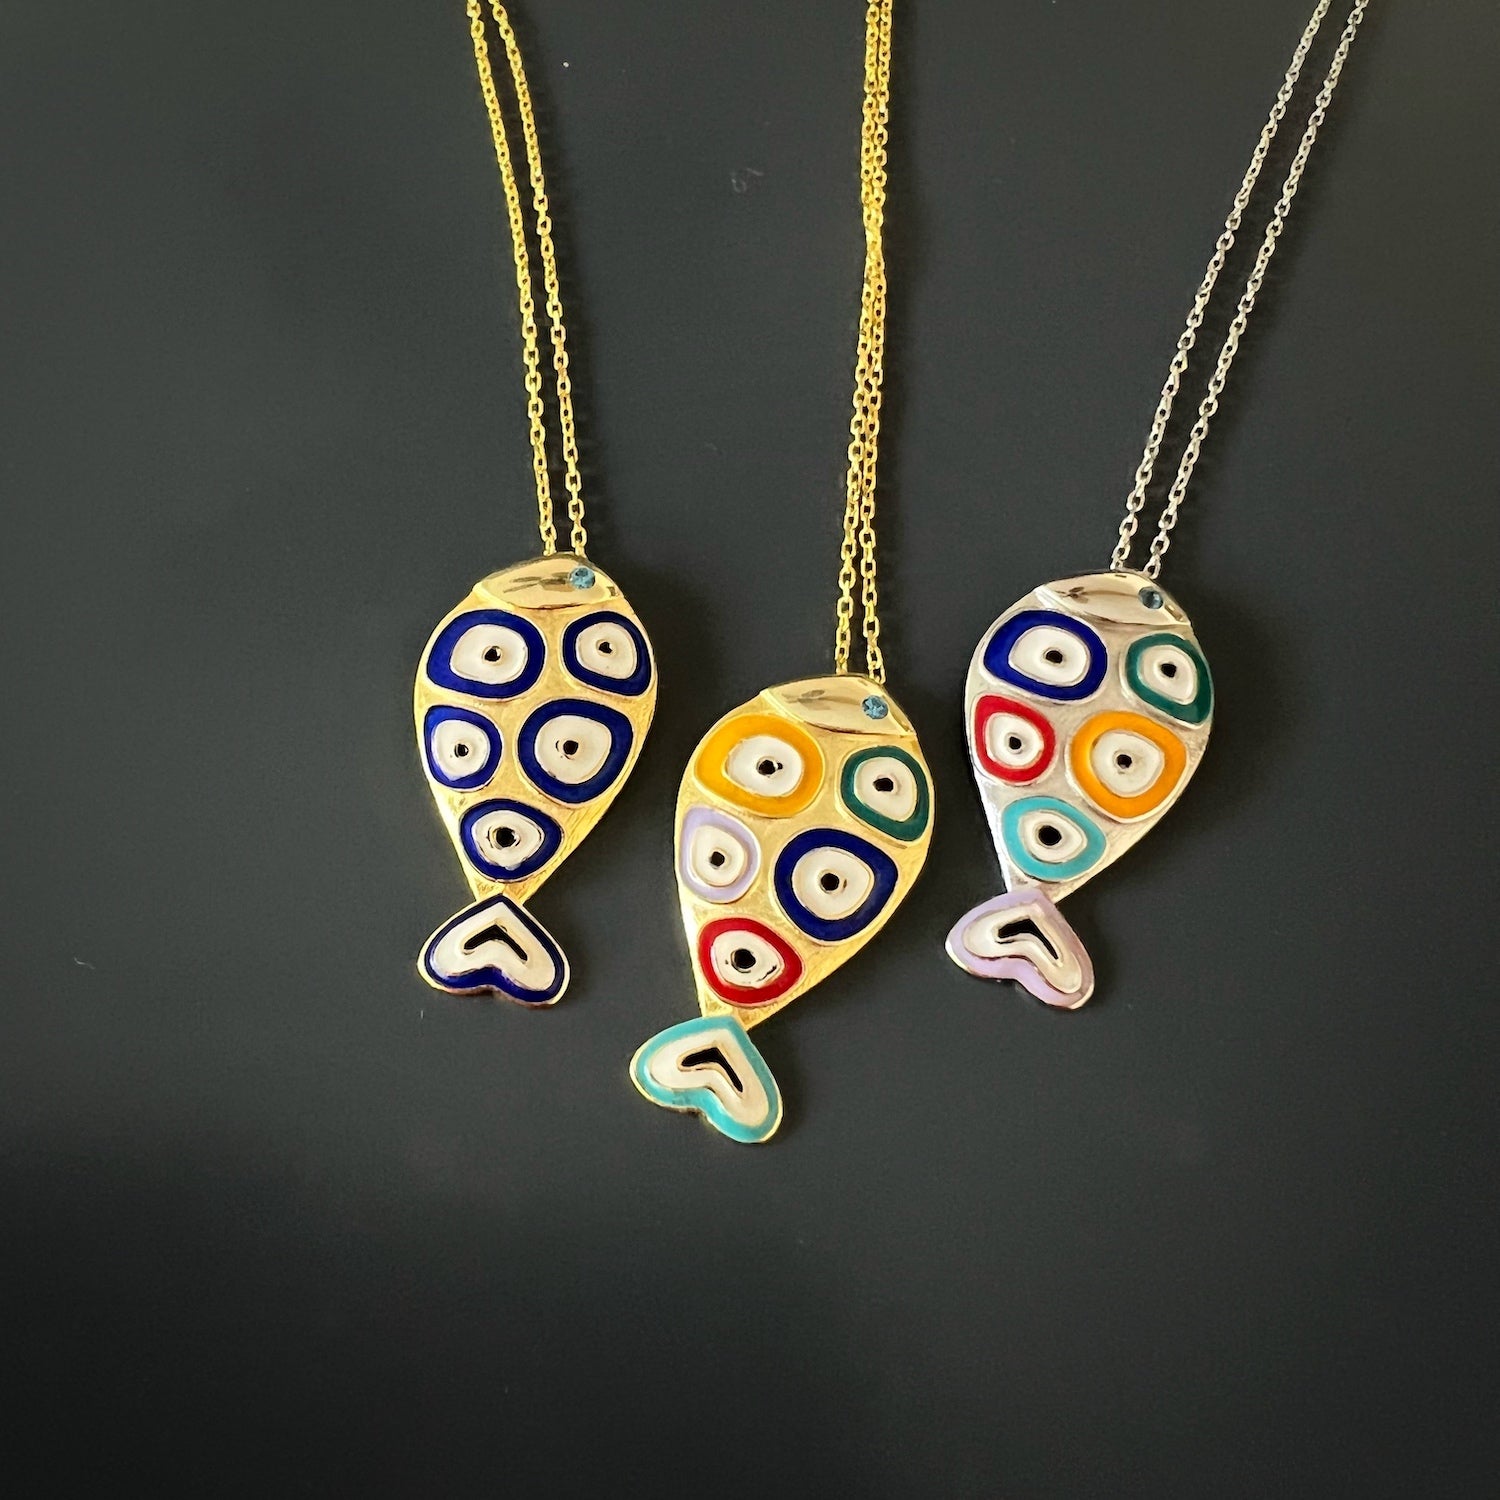 Vibrant Gold and Enamel Evil Eye Necklace - Striking necklace featuring a fish pendant adorned with colorful enamel and evil eye designs, handcrafted from 925 Sterling silver on 18K gold plated chain.